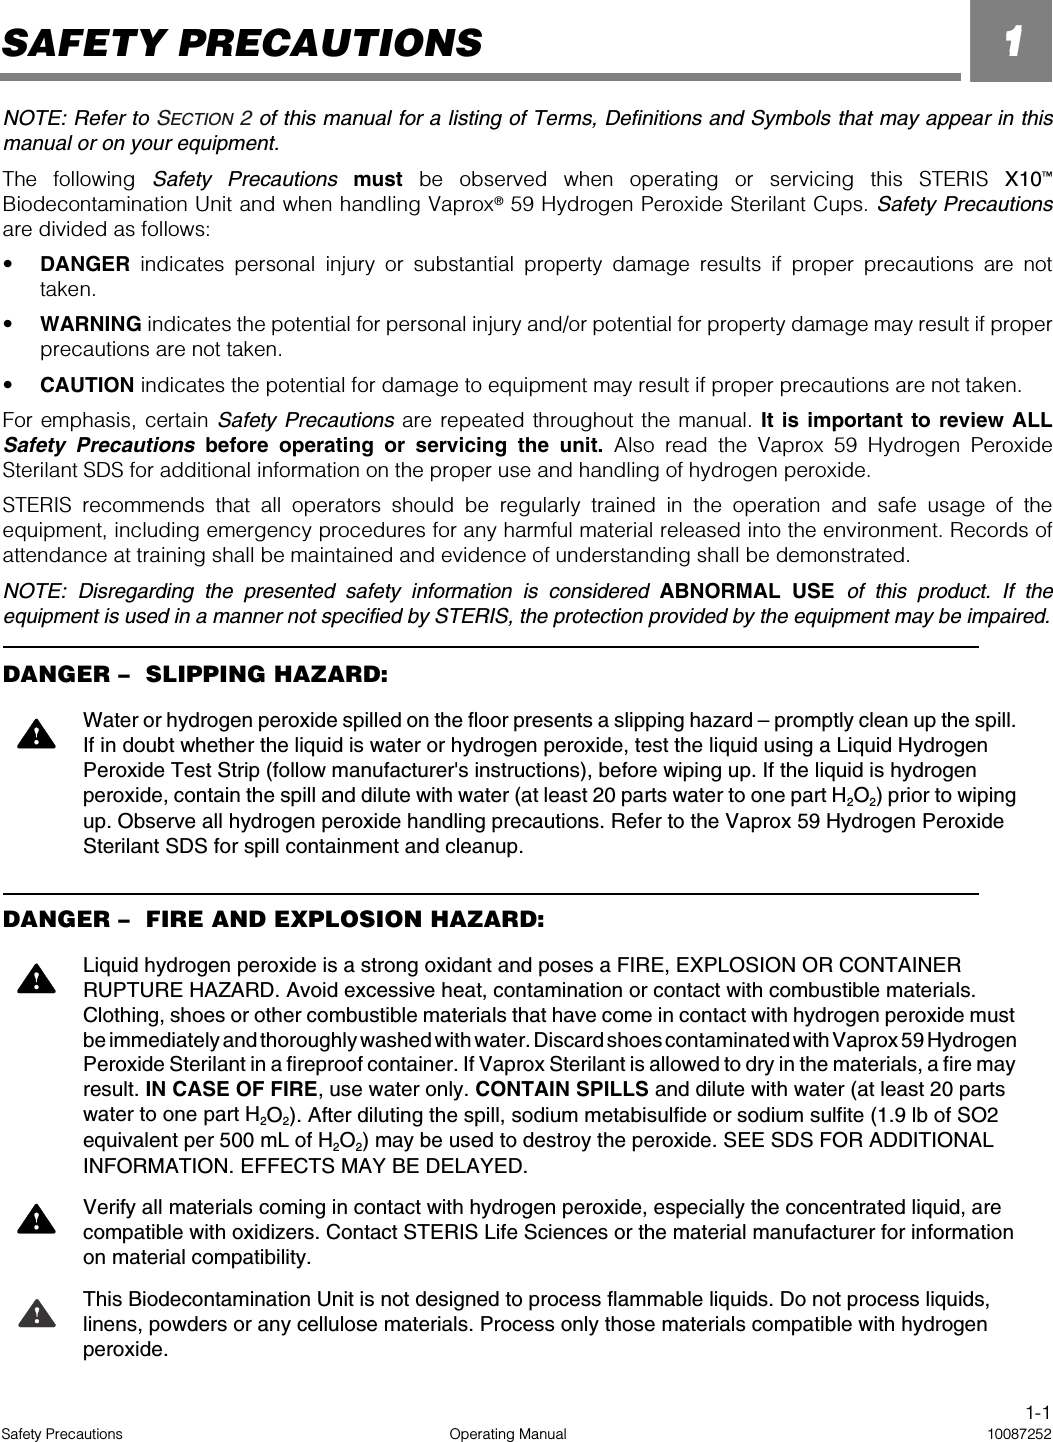 1-1Safety Precautions Operating Manual 100872521NOTE: Refer to SECTION 2 of this manual for a listing of Terms, Definitions and Symbols that may appear in thismanual or on your equipment.The following Safety Precautions must be observed when operating or servicing this STERIS X10™Biodecontamination Unit and when handling Vaprox® 59 Hydrogen Peroxide Sterilant Cups. Safety Precautionsare divided as follows:•DANGER indicates personal injury or substantial property damage results if proper precautions are nottaken. •WARNING indicates the potential for personal injury and/or potential for property damage may result if properprecautions are not taken. •CAUTION indicates the potential for damage to equipment may result if proper precautions are not taken.For emphasis, certain Safety Precautions are repeated throughout the manual. It is important to review ALLSafety Precautions before operating or servicing the unit. Also read the Vaprox 59 Hydrogen PeroxideSterilant SDS for additional information on the proper use and handling of hydrogen peroxide.STERIS recommends that all operators should be regularly trained in the operation and safe usage of theequipment, including emergency procedures for any harmful material released into the environment. Records ofattendance at training shall be maintained and evidence of understanding shall be demonstrated.NOTE: Disregarding the presented safety information is considered ABNORMAL USE of this product. If theequipment is used in a manner not specified by STERIS, the protection provided by the equipment may be impaired.DANGER –   SLIPPING HAZARD:DANGER –   FIRE AND EXPLOSION HAZARD:Water or hydrogen peroxide spilled on the floor presents a slipping hazard – promptly clean up the spill. If in doubt whether the liquid is water or hydrogen peroxide, test the liquid using a Liquid Hydrogen Peroxide Test Strip (follow manufacturer&apos;s instructions), before wiping up. If the liquid is hydrogen peroxide, contain the spill and dilute with water (at least 20 parts water to one part H2O2) prior to wiping up. Observe all hydrogen peroxide handling precautions. Refer to the Vaprox 59 Hydrogen Peroxide Sterilant SDS for spill containment and cleanup.Liquid hydrogen peroxide is a strong oxidant and poses a FIRE, EXPLOSION OR CONTAINER RUPTURE HAZARD. Avoid excessive heat, contamination or contact with combustible materials. Clothing, shoes or other combustible materials that have come in contact with hydrogen peroxide must be immediately and thoroughly washed with water. Discard shoes contaminated with Vaprox 59 Hydrogen Peroxide Sterilant in a fireproof container. If Vaprox Sterilant is allowed to dry in the materials, a fire may result. IN CASE OF FIRE, use water only. CONTAIN SPILLS and dilute with water (at least 20 parts water to one part H2O2). After diluting the spill, sodium metabisulfide or sodium sulfite (1.9 lb of SO2 equivalent per 500 mL of H2O2) may be used to destroy the peroxide. SEE SDS FOR ADDITIONAL INFORMATION. EFFECTS MAY BE DELAYED.Verify all materials coming in contact with hydrogen peroxide, especially the concentrated liquid, are compatible with oxidizers. Contact STERIS Life Sciences or the material manufacturer for information on material compatibility.This Biodecontamination Unit is not designed to process flammable liquids. Do not process liquids, linens, powders or any cellulose materials. Process only those materials compatible with hydrogen peroxide.SAFETY PRECAUTIONS 1